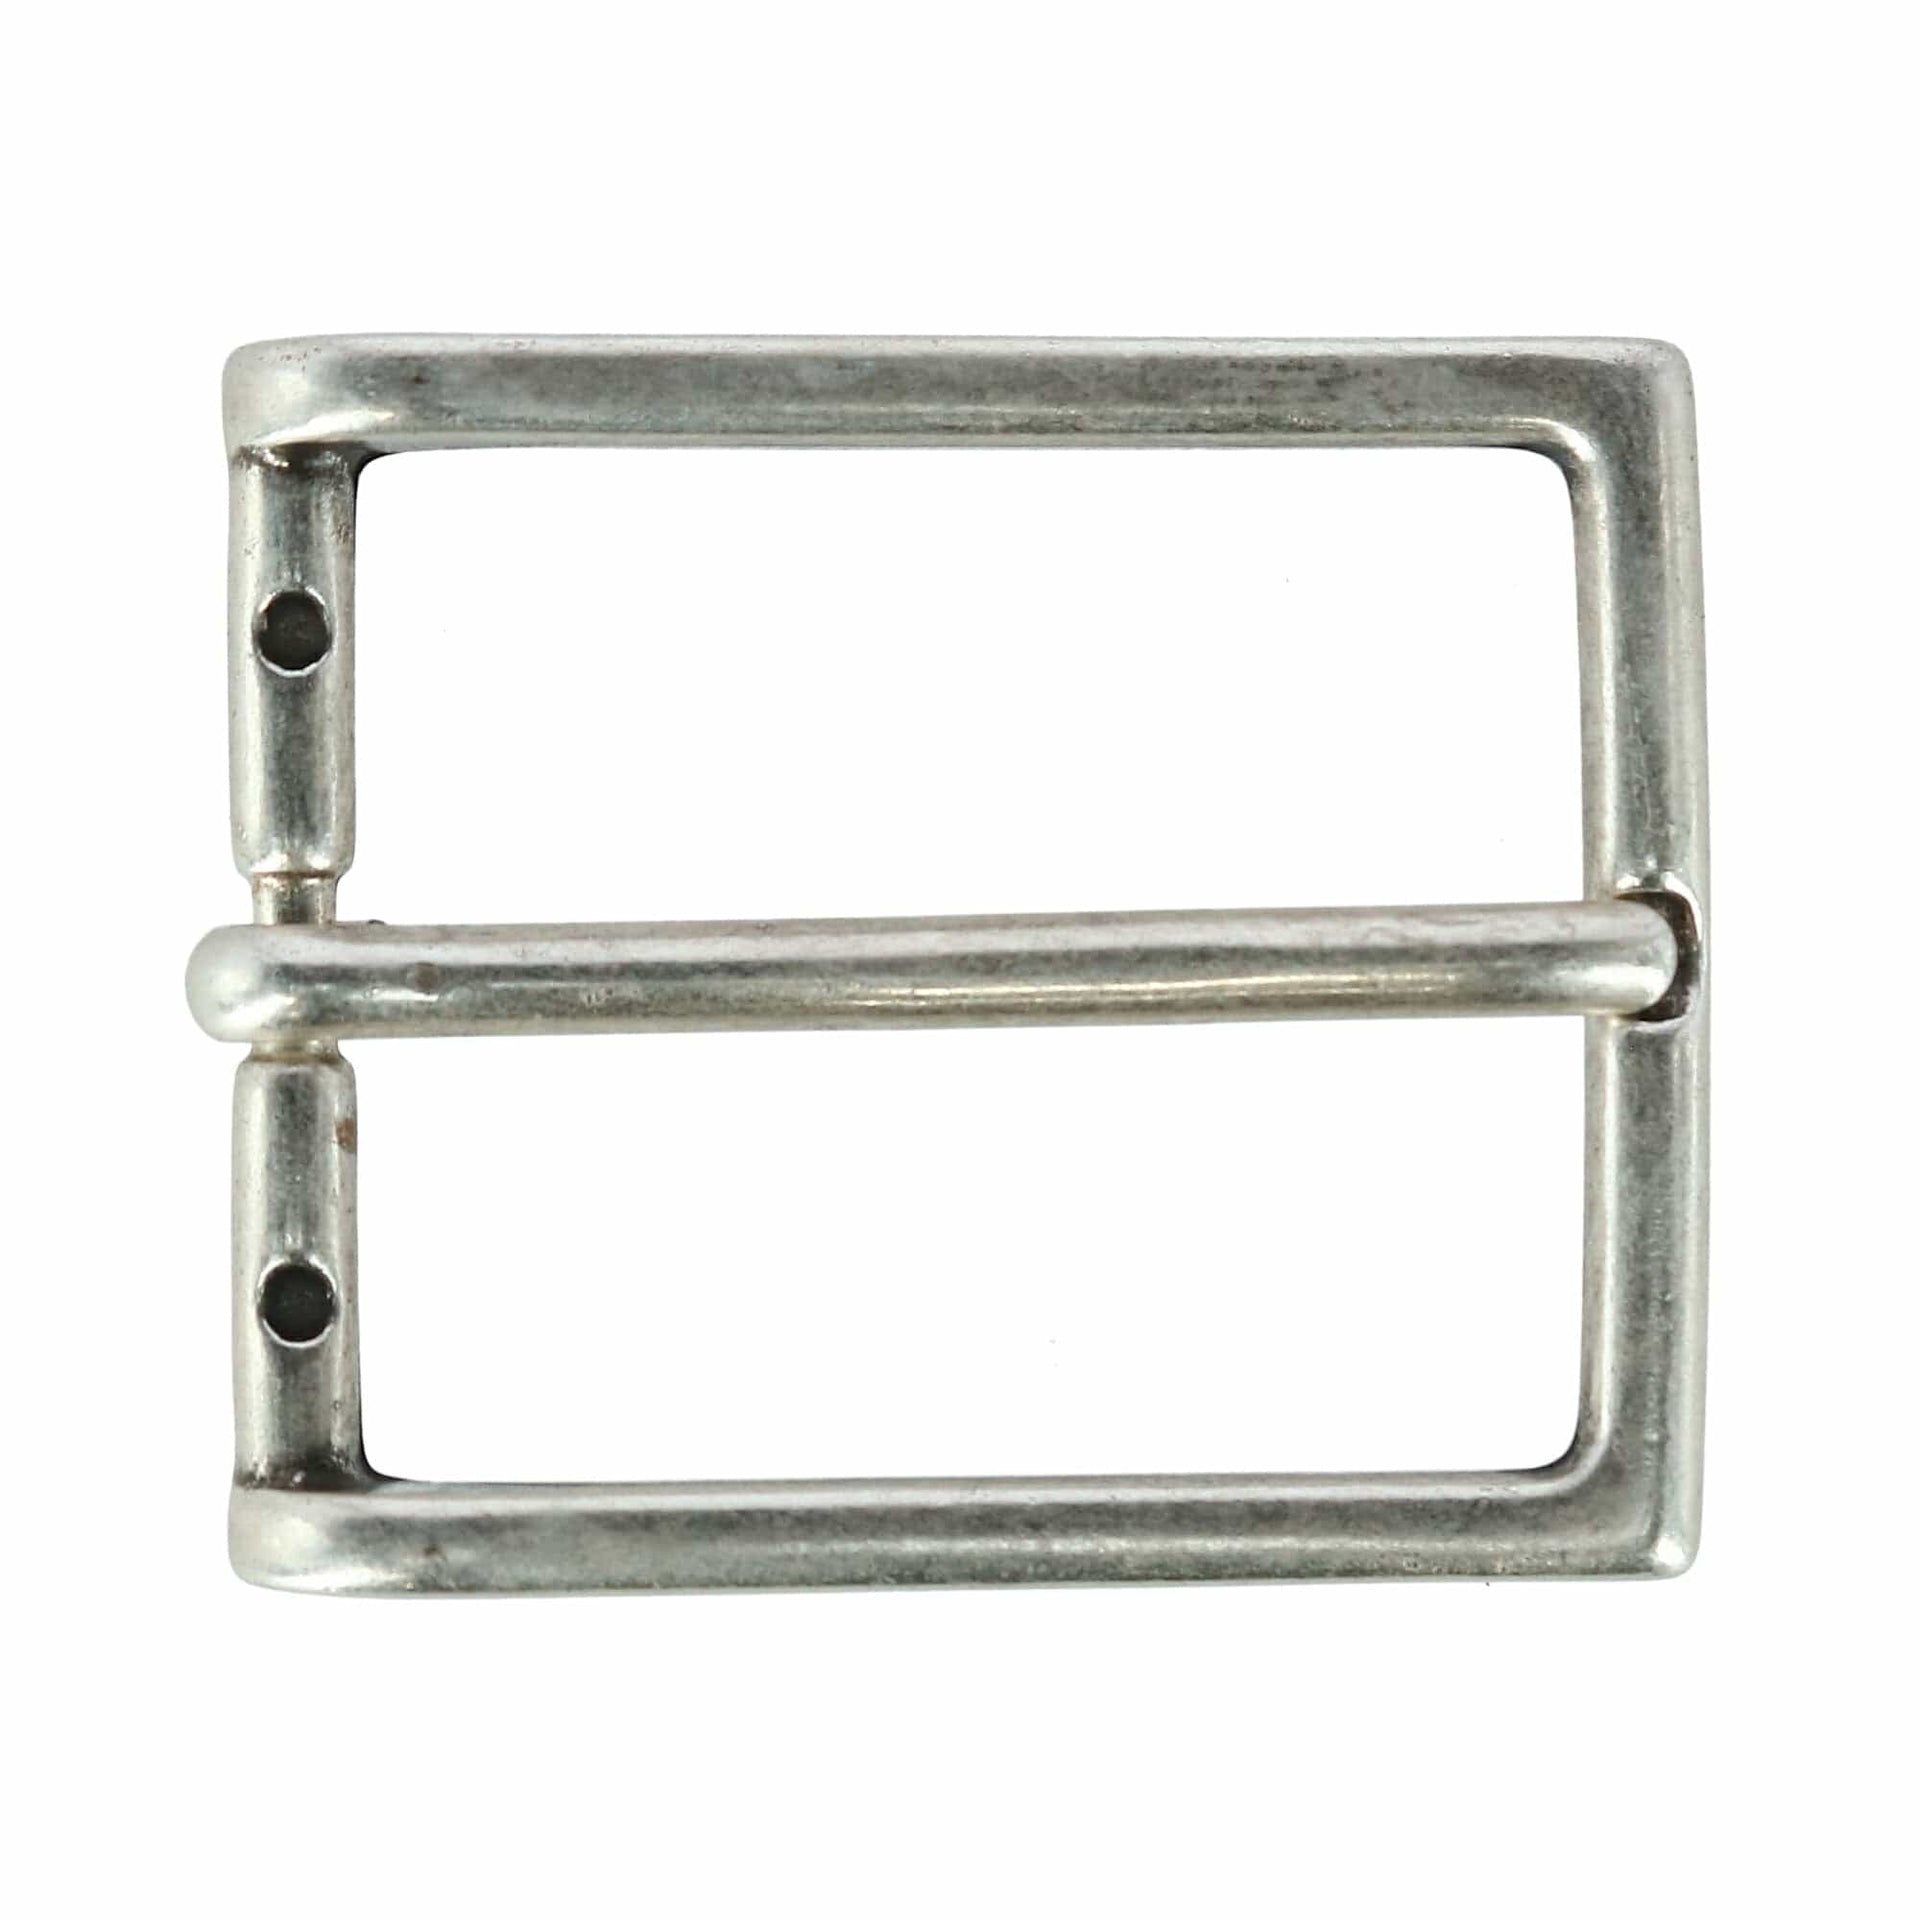 35mm Classic Solid Brass Single Pronged Harness Belt Buckle